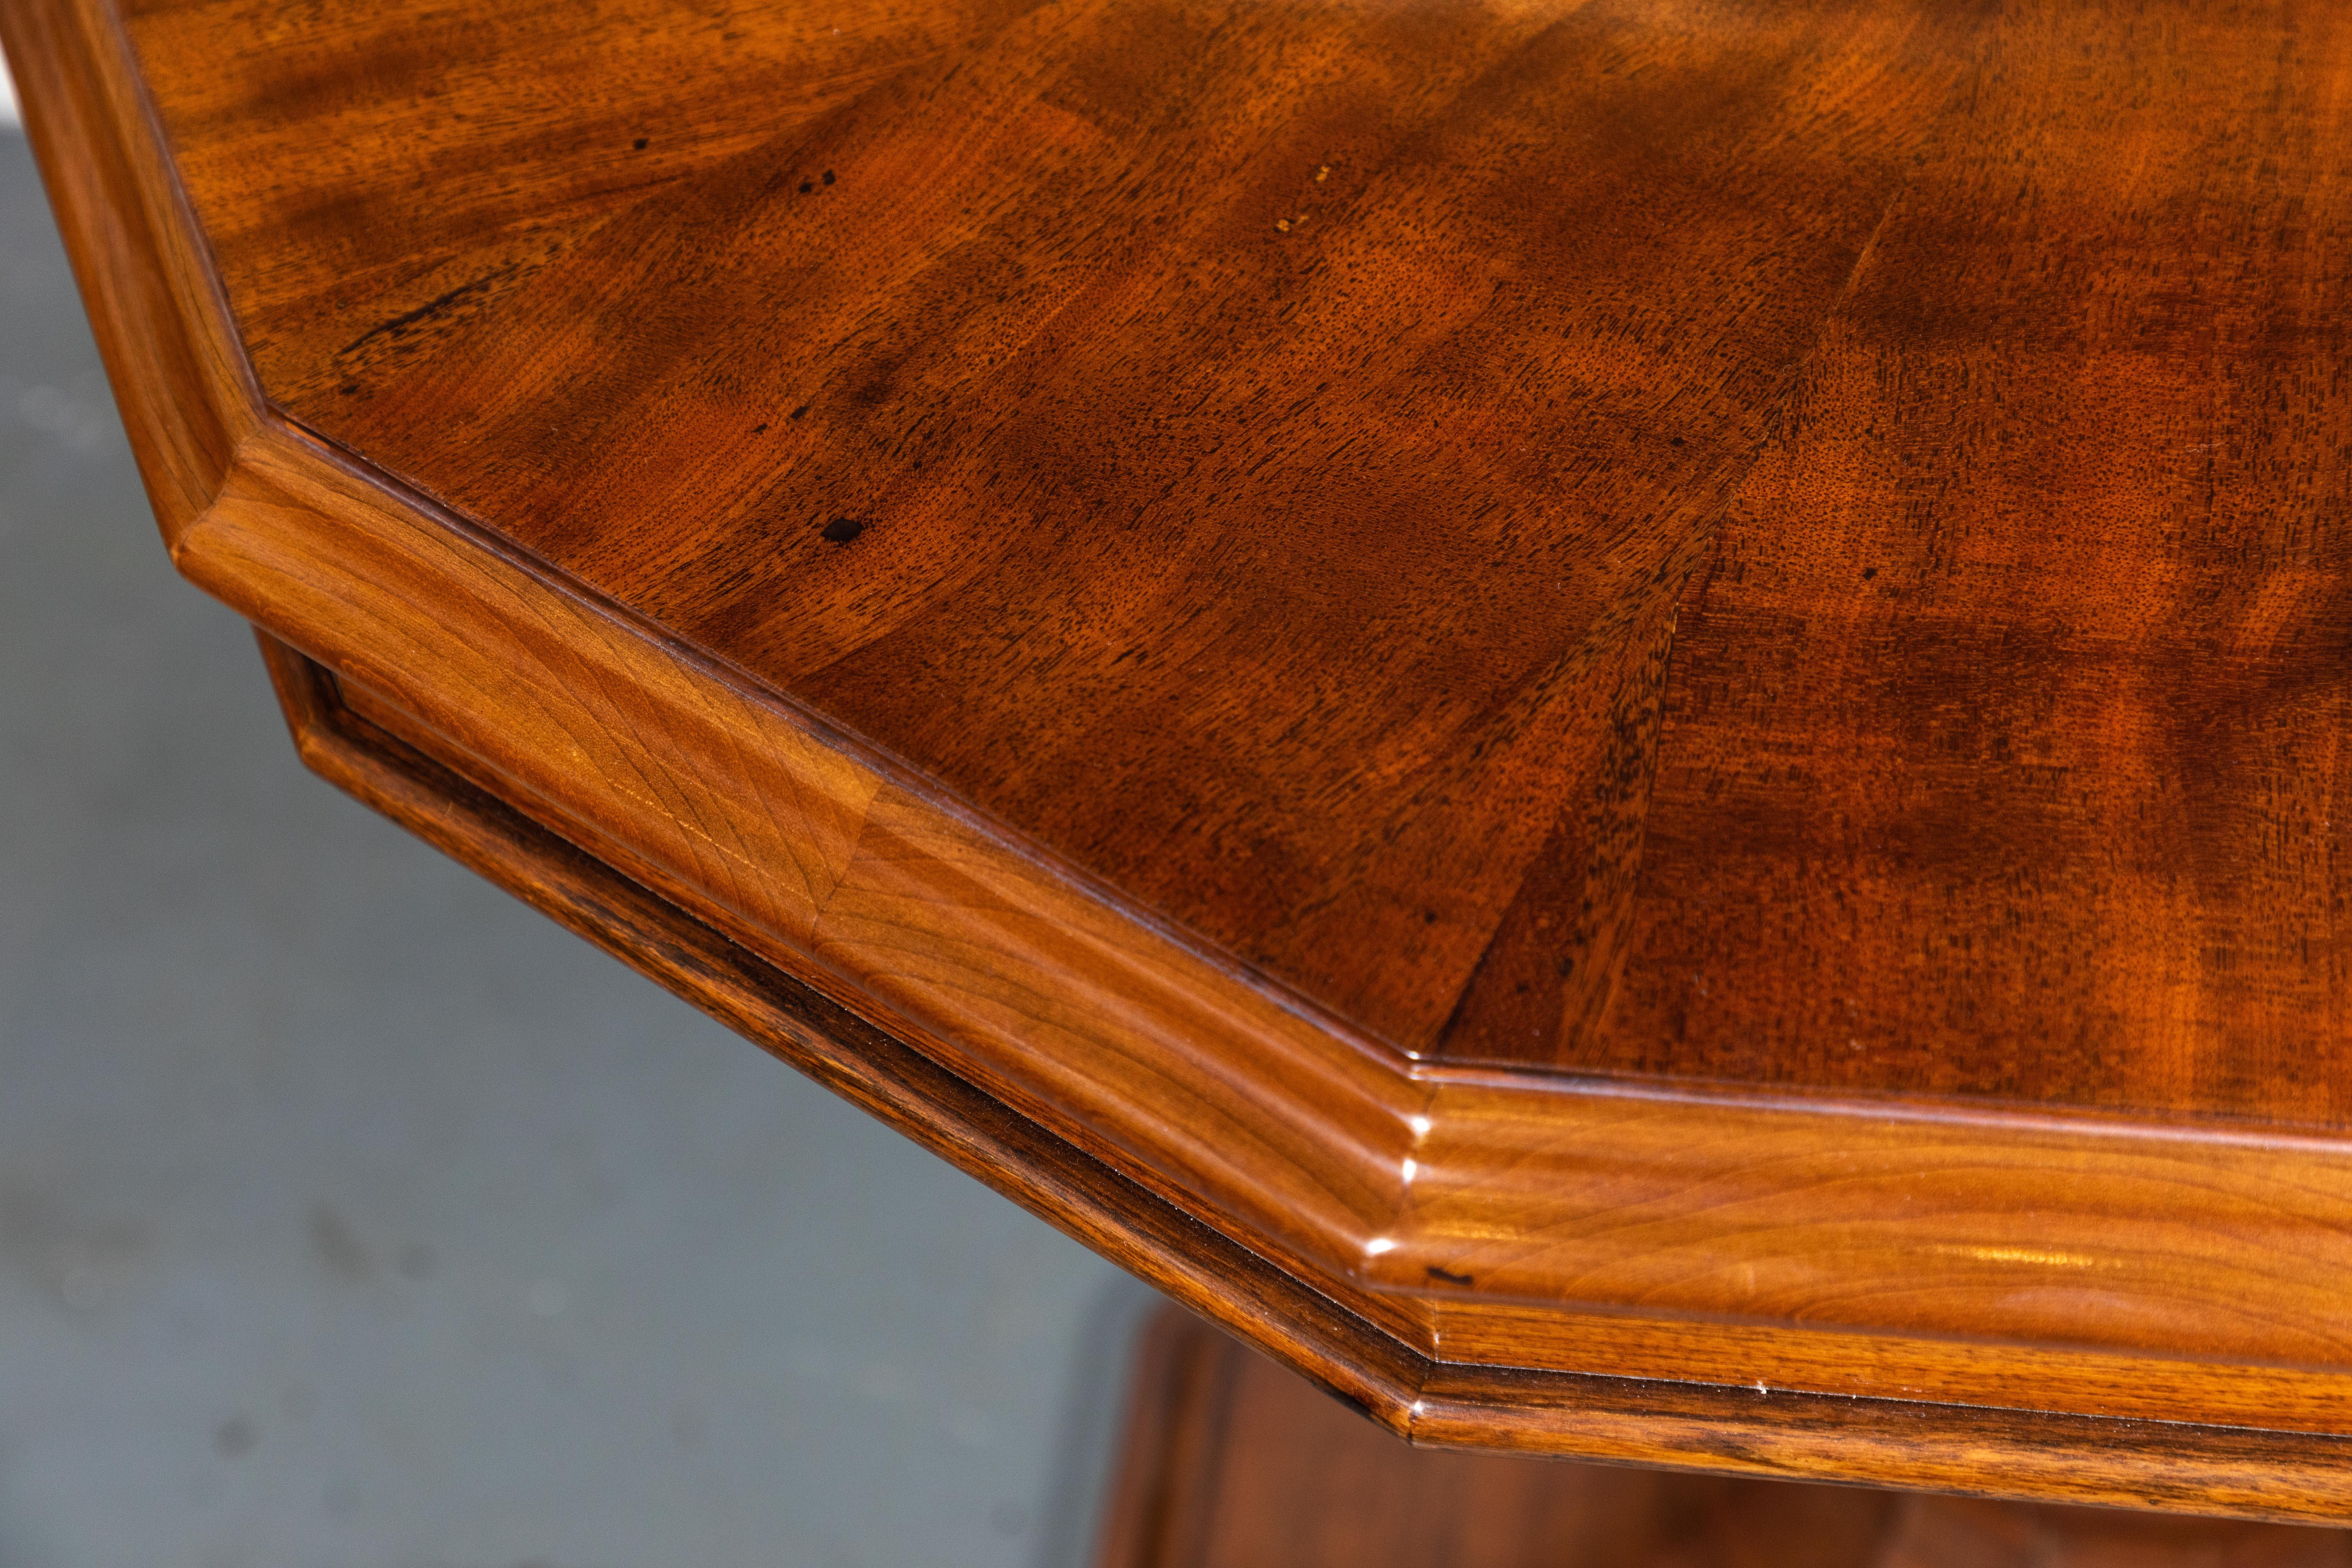 Carved 12-Sided, Veneered Occasional Table